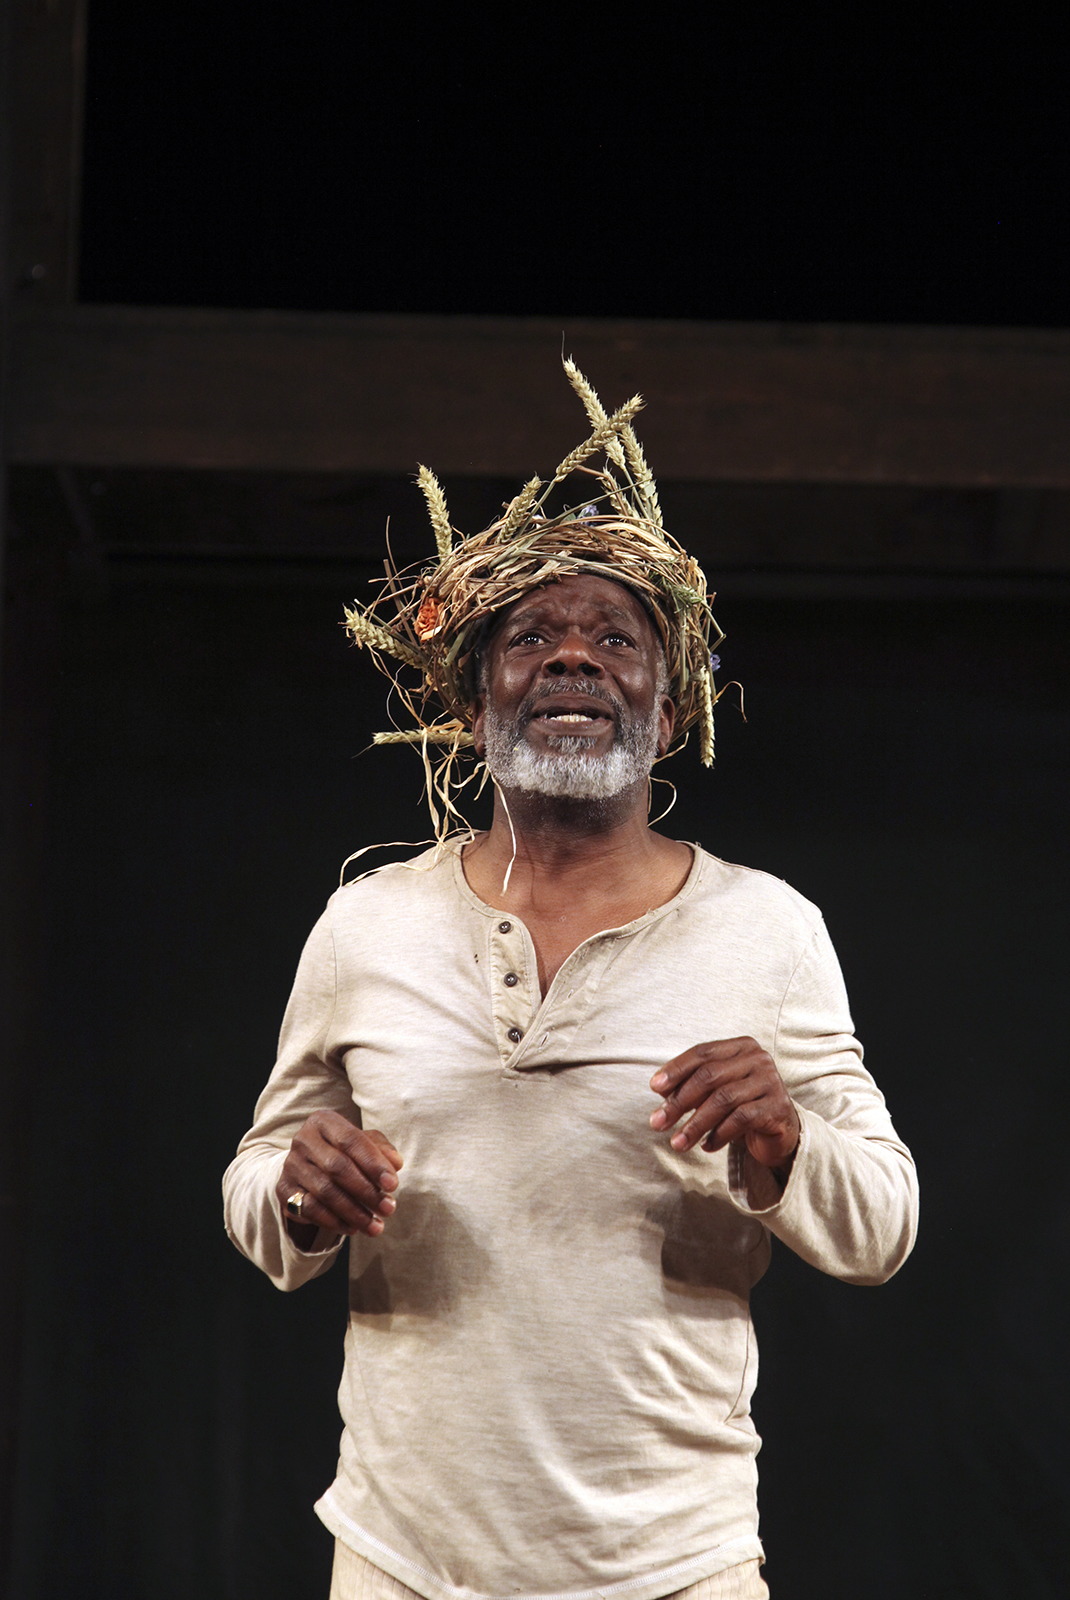 A man wearing white undergarments stands dismayed with a wreath of branches on his head.